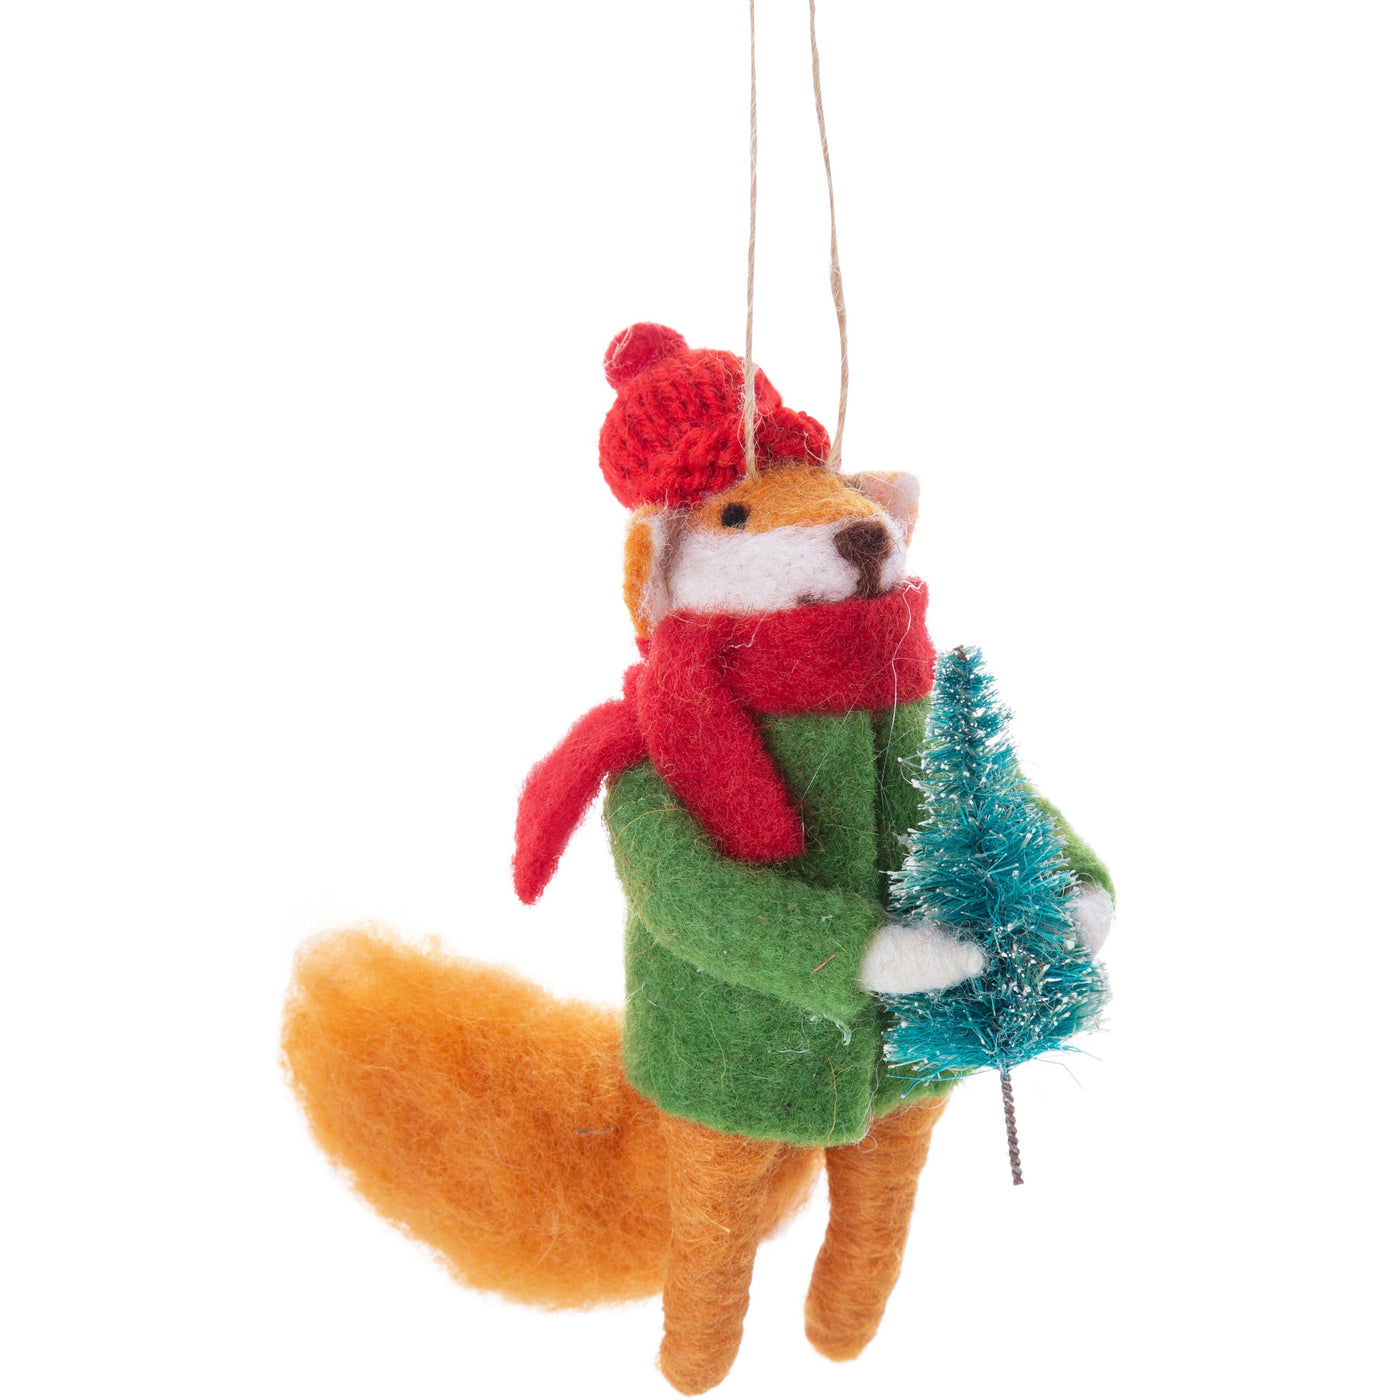 Fox In Winter Clothes Holding A Tree Felt Ornament